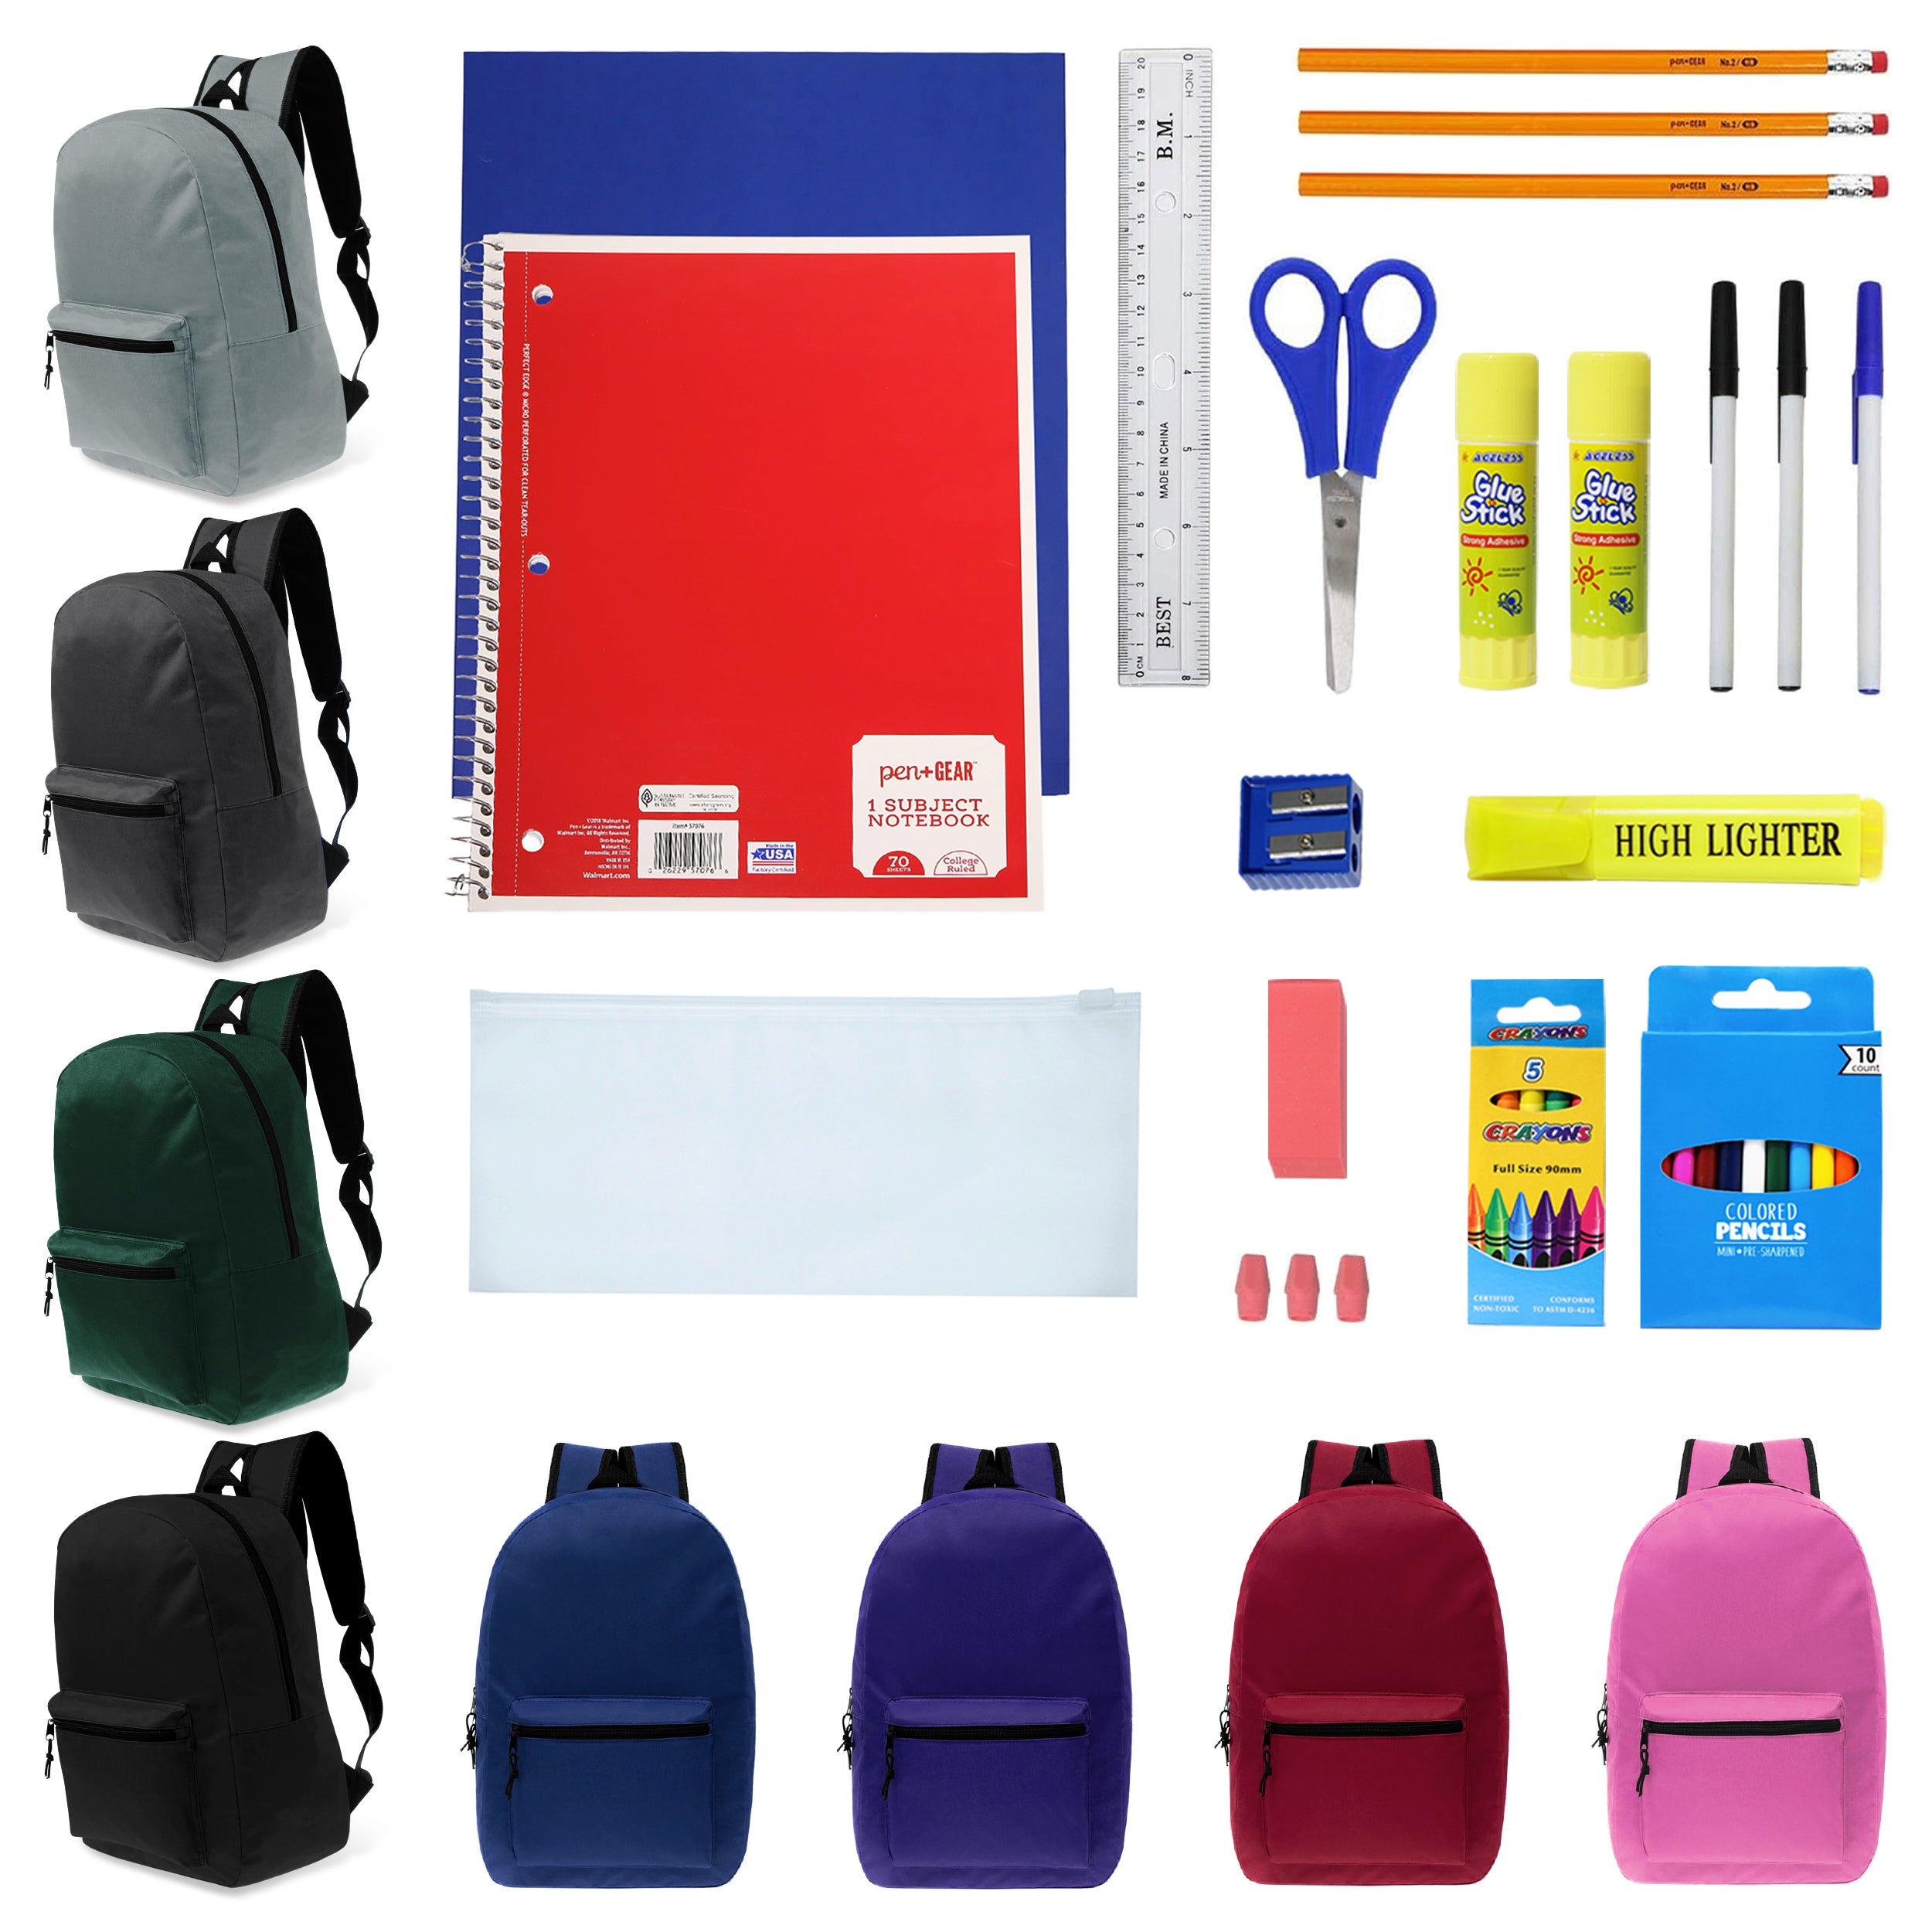 17-Inch Wholesale Backpacks School Supply - Kits Case of 12